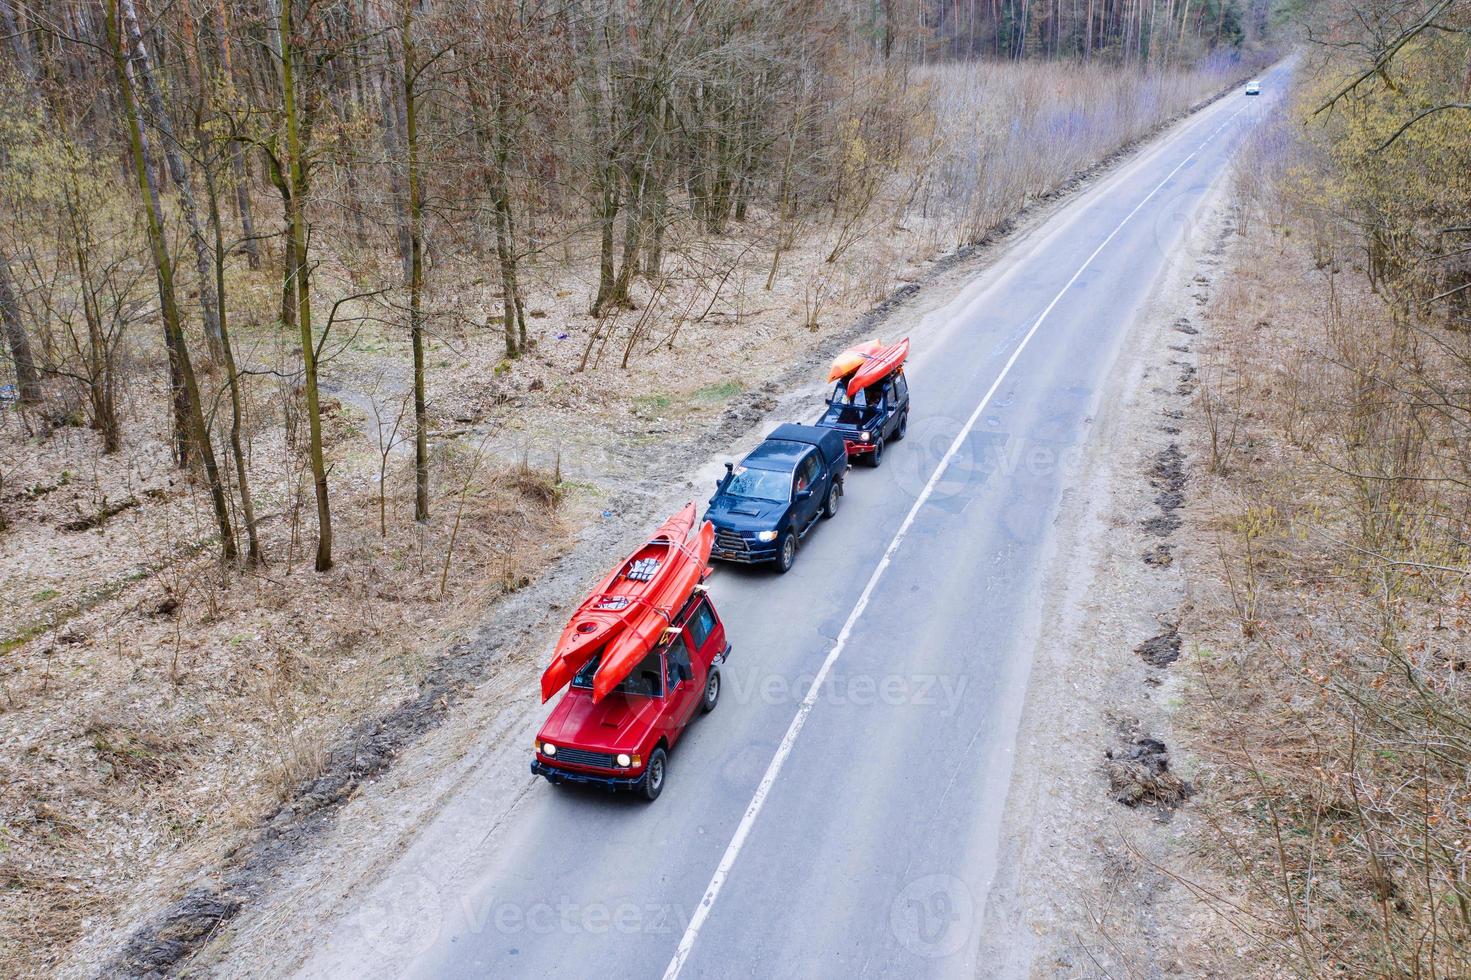 Several cars with kayaks on roof rack driving on the road among trees photo